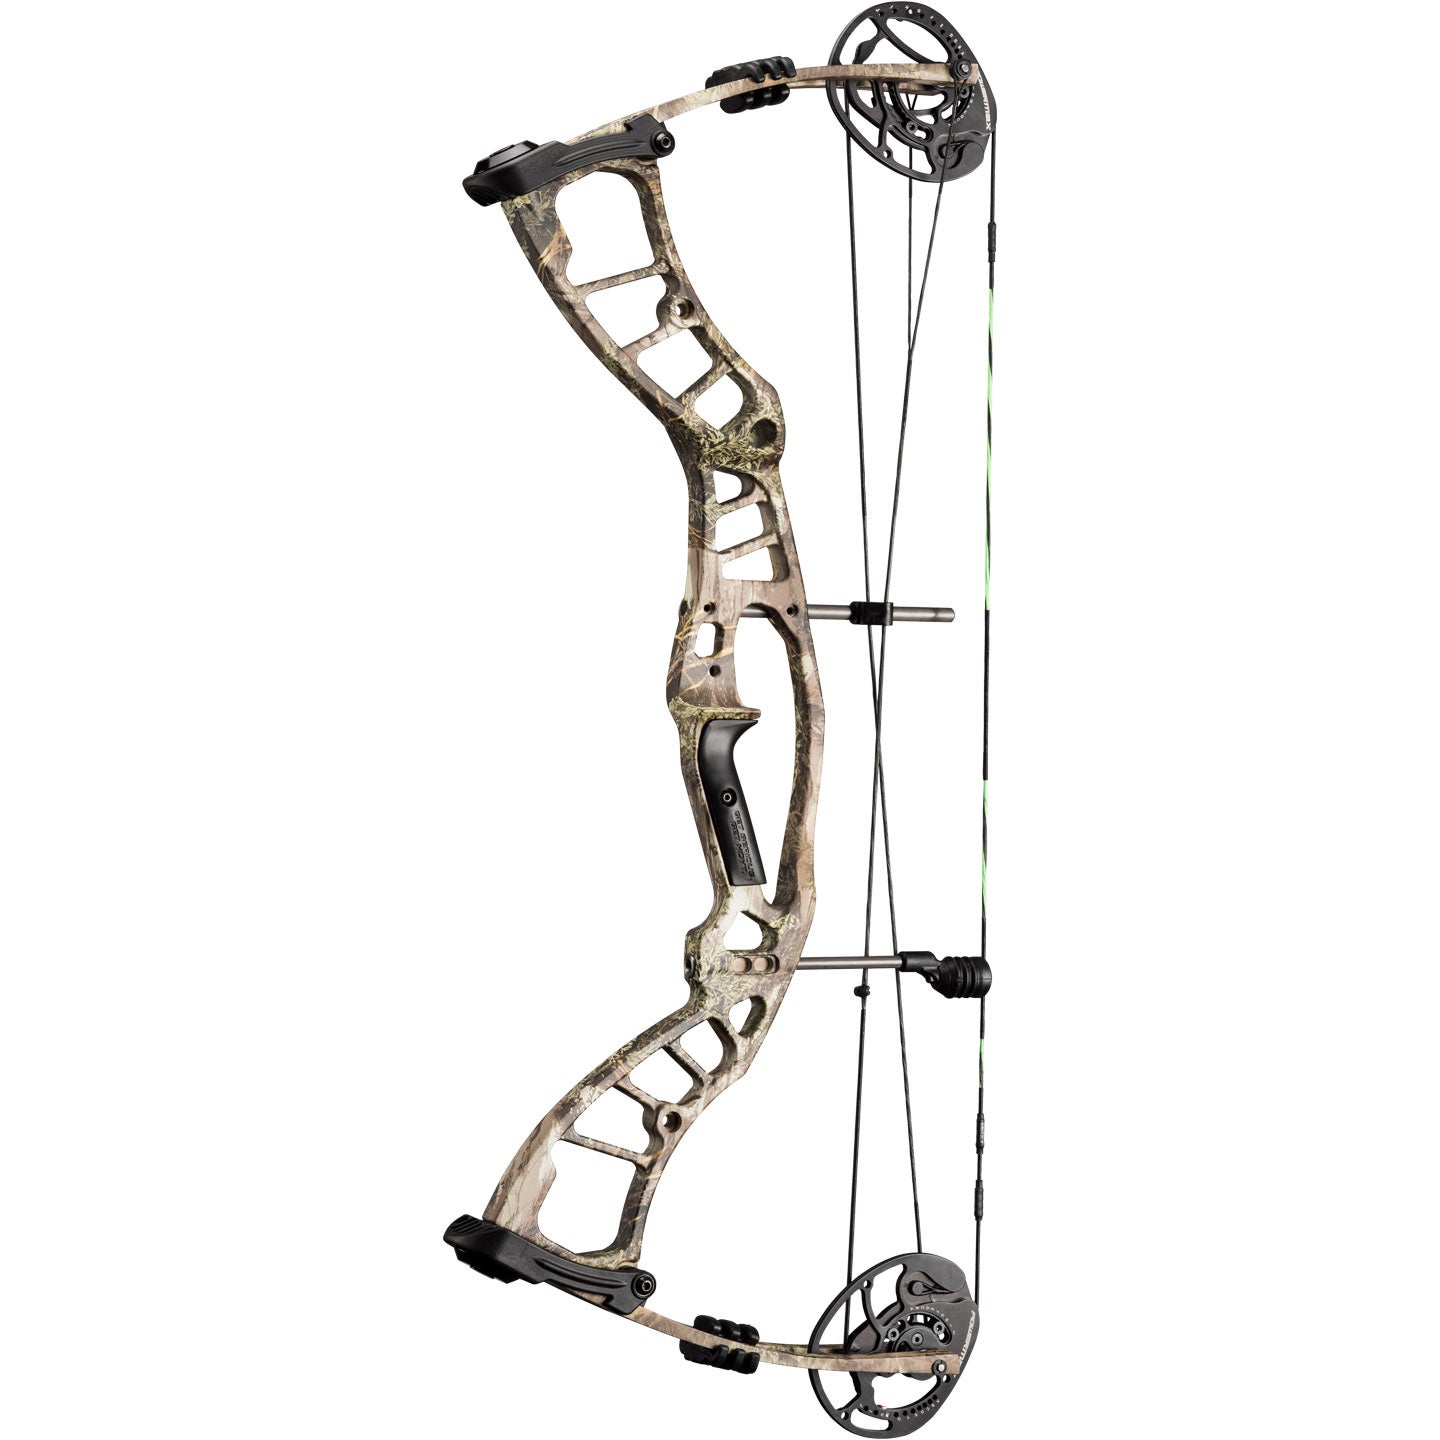 How to Buy the Perfect Compound Bow for Hunting Field & Stream